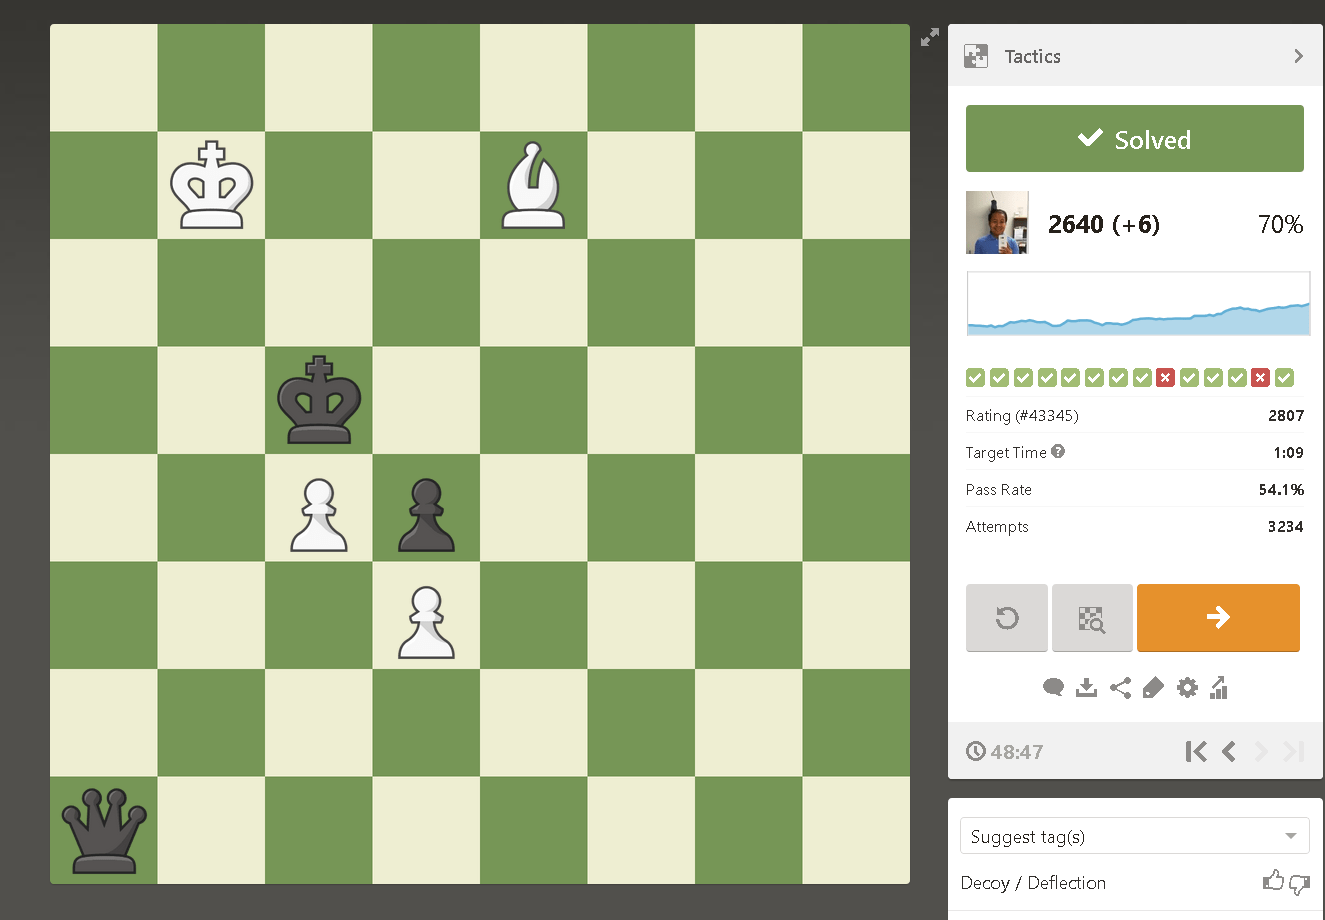 There is a person on chess.com with a rating of 4178 at the time